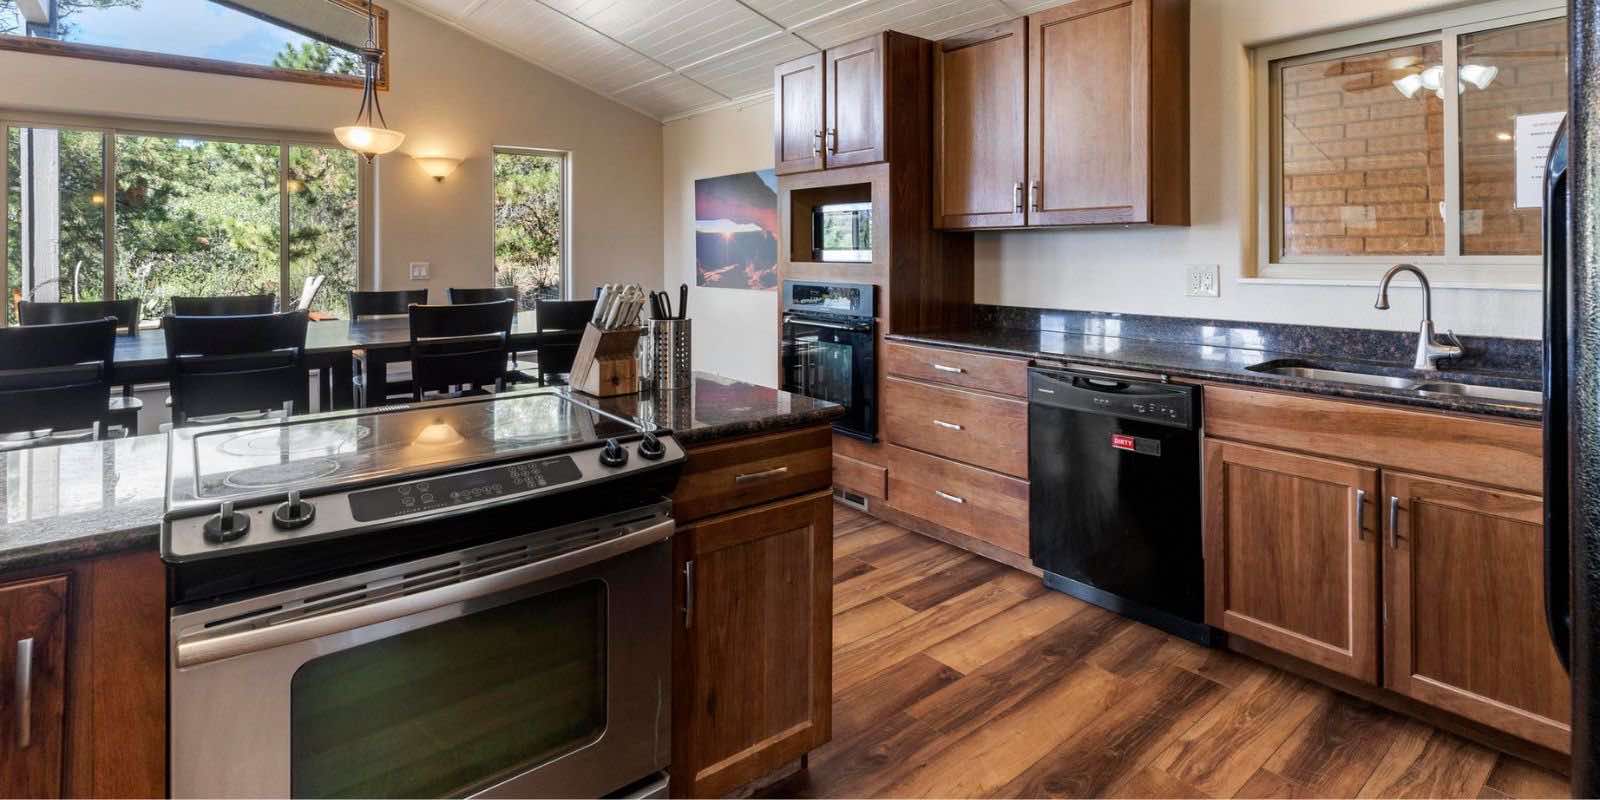 kitchen with range, oven, and countertops